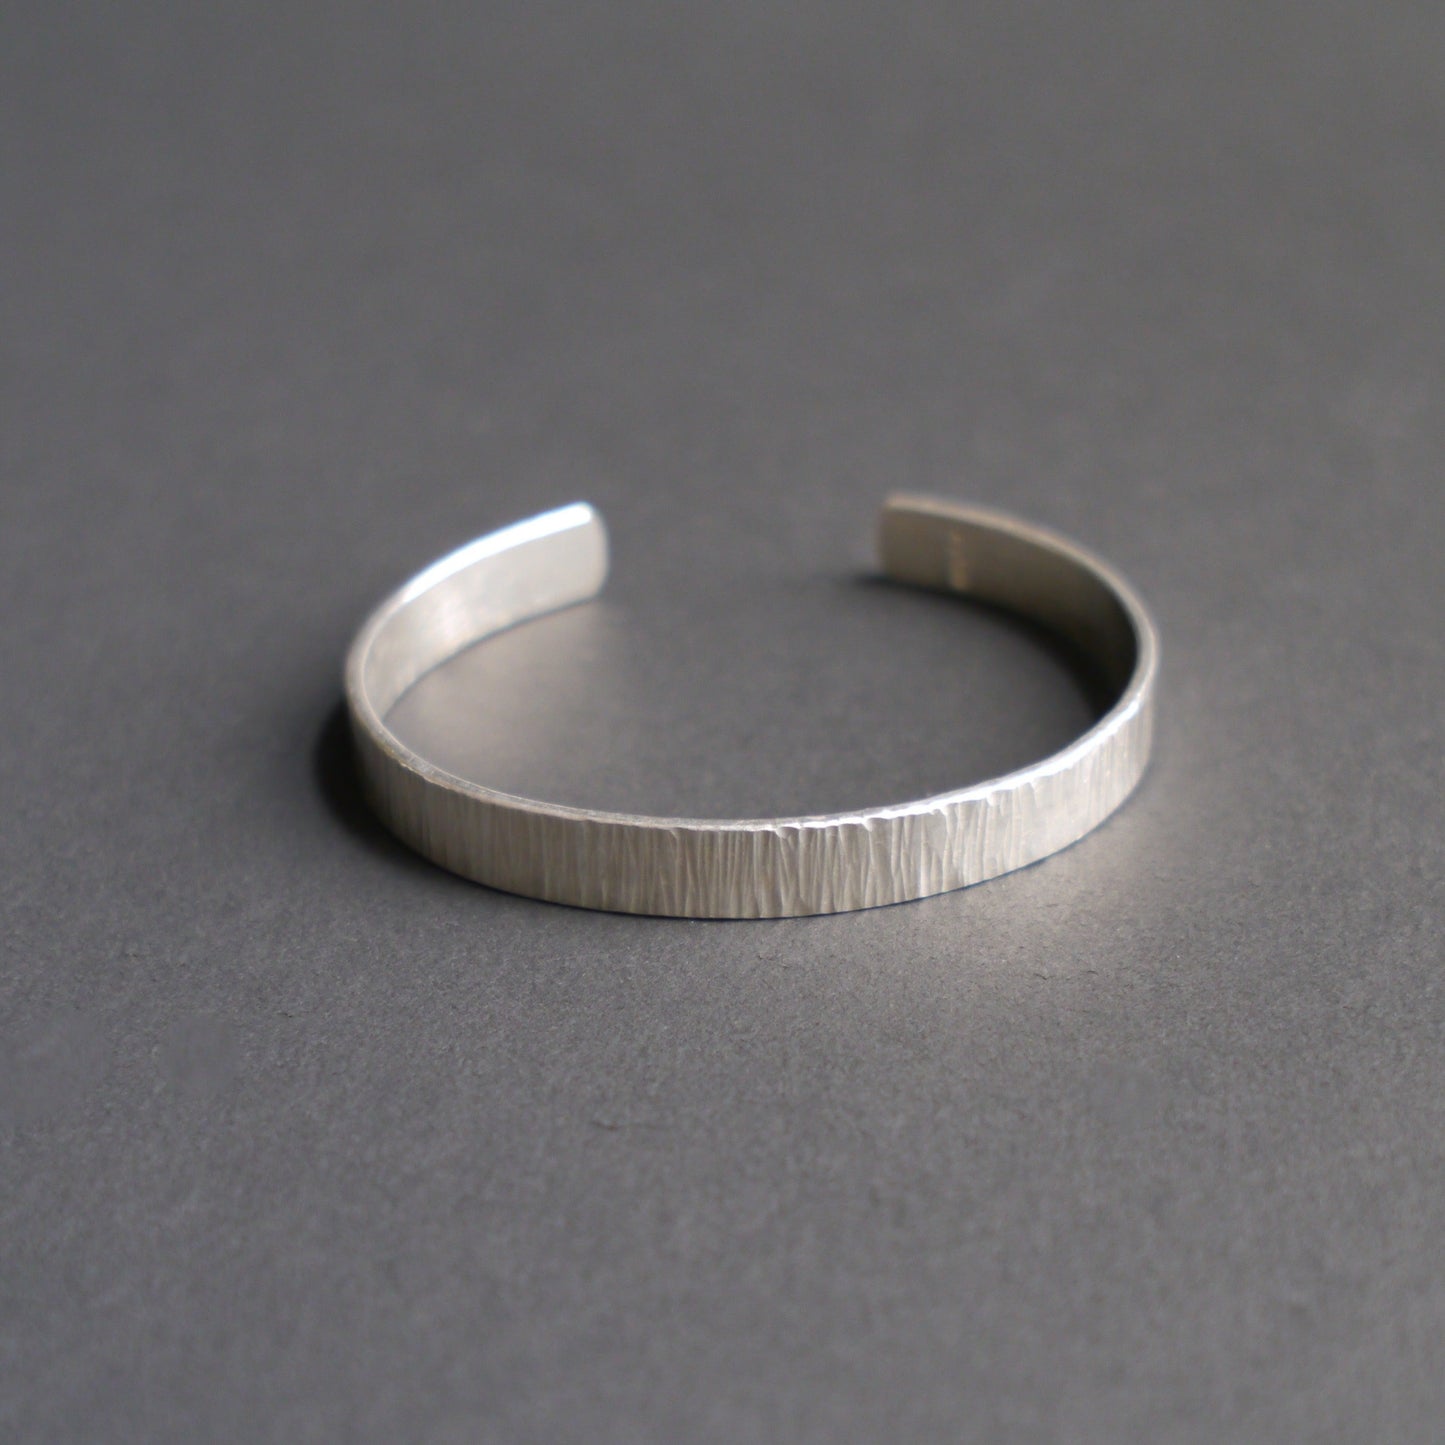 Ripple Texture Cuff in 8mm Sterling Silver